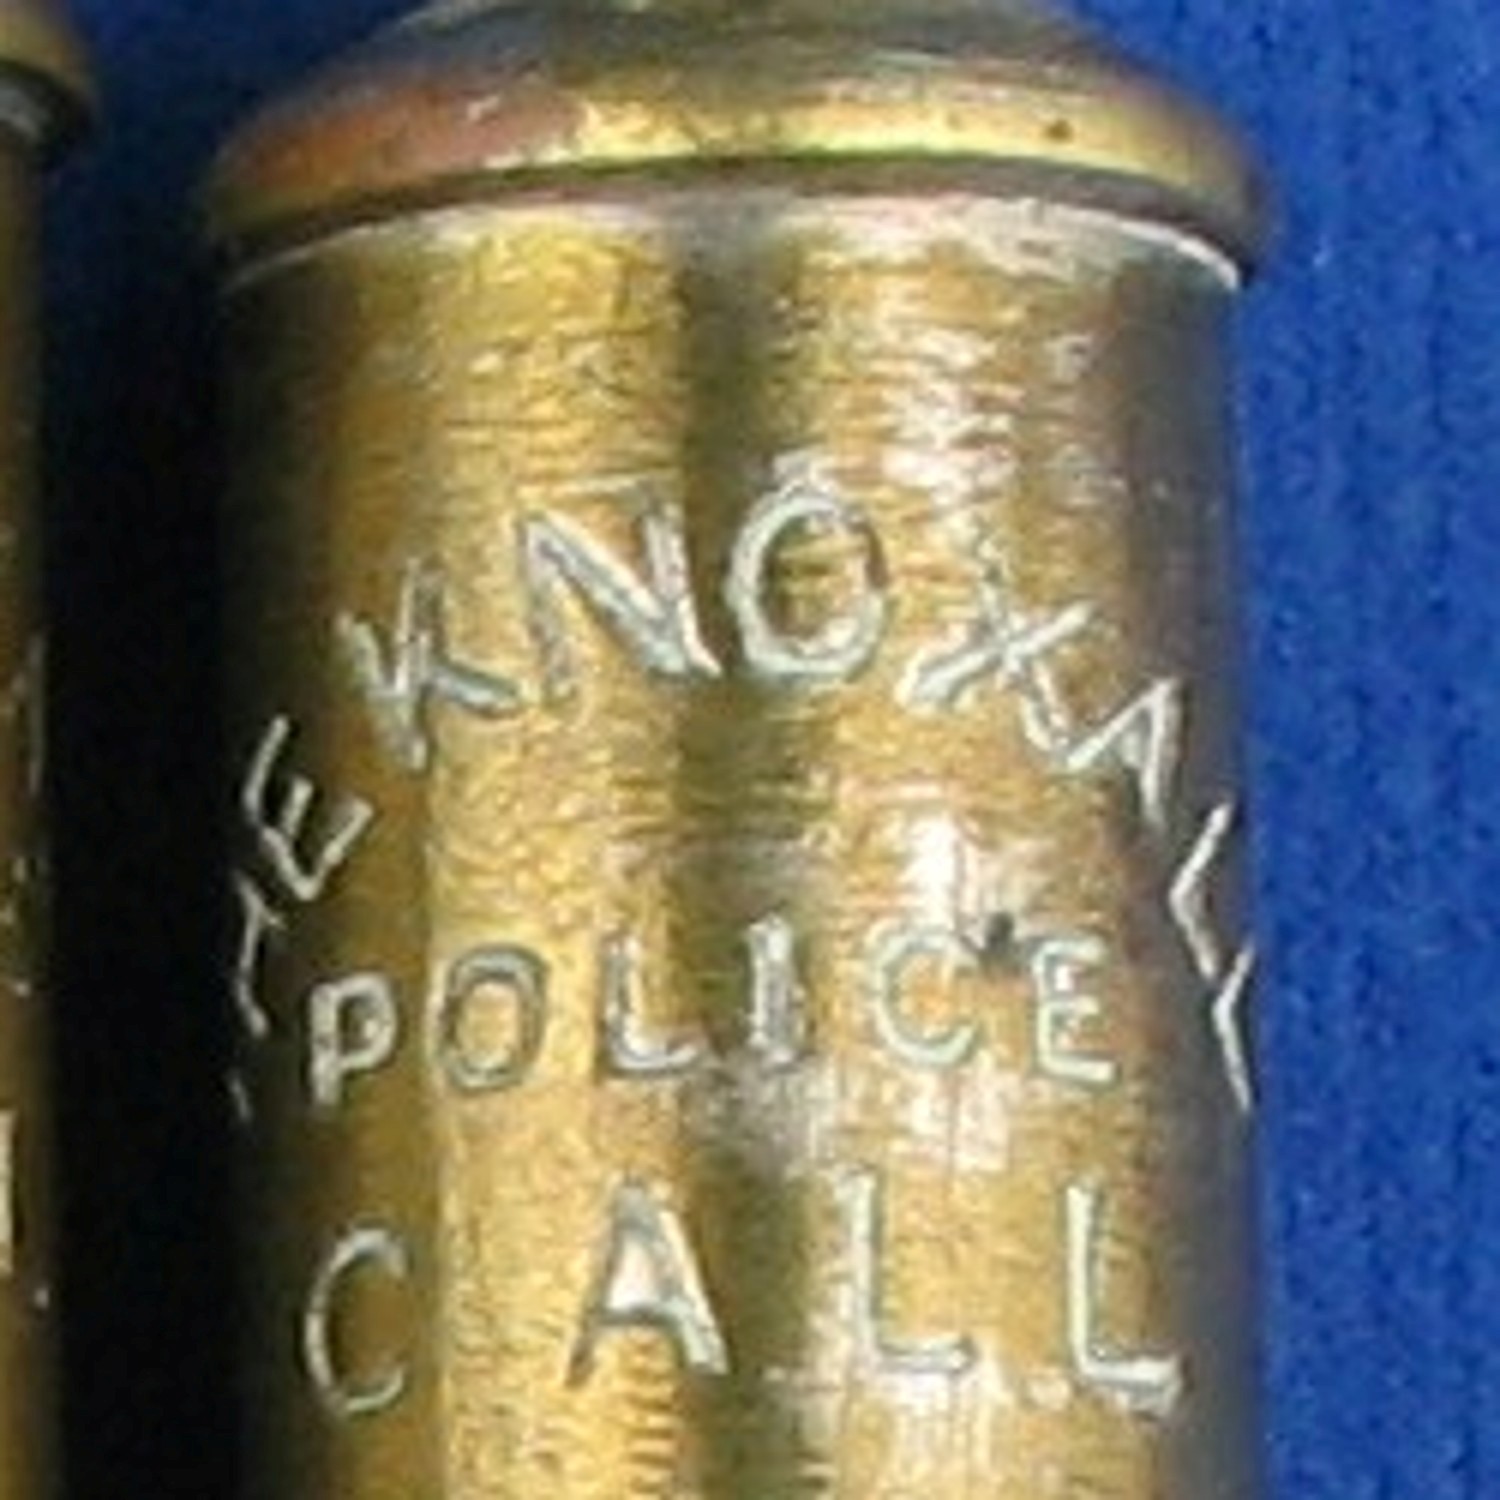 knoxall police whistle